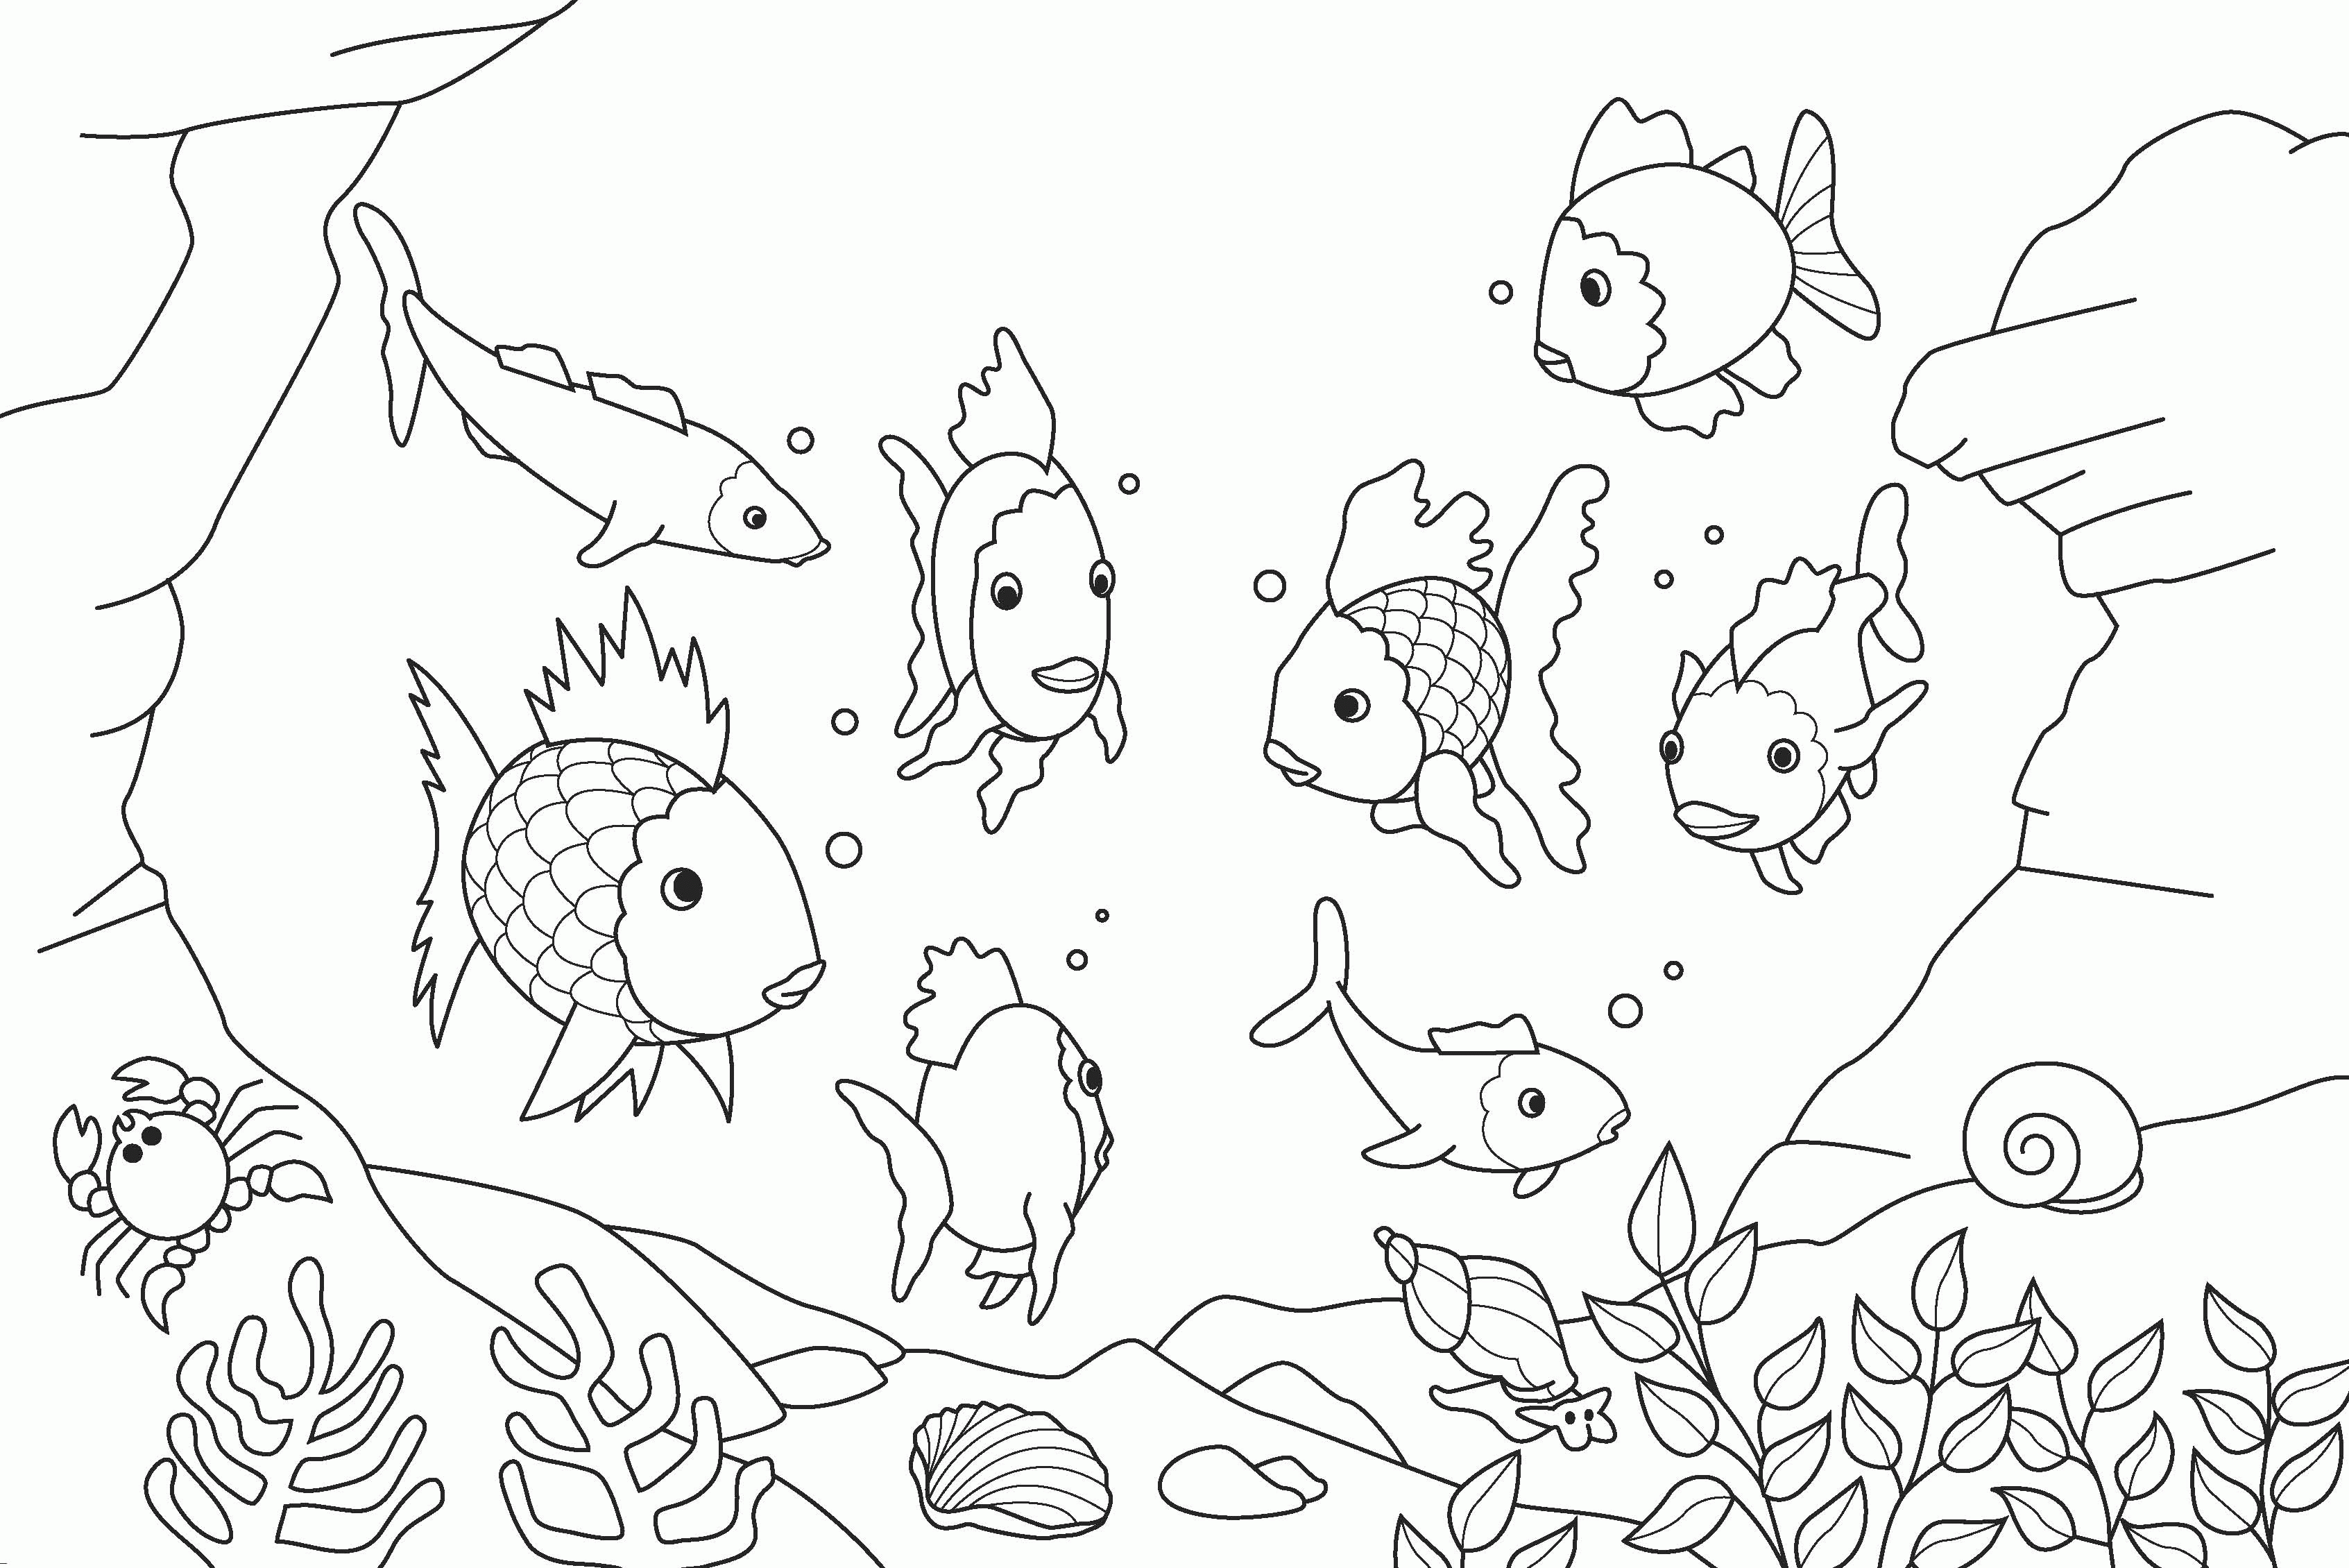 Ocean Coloring Pages For Preschool   Coloring Home